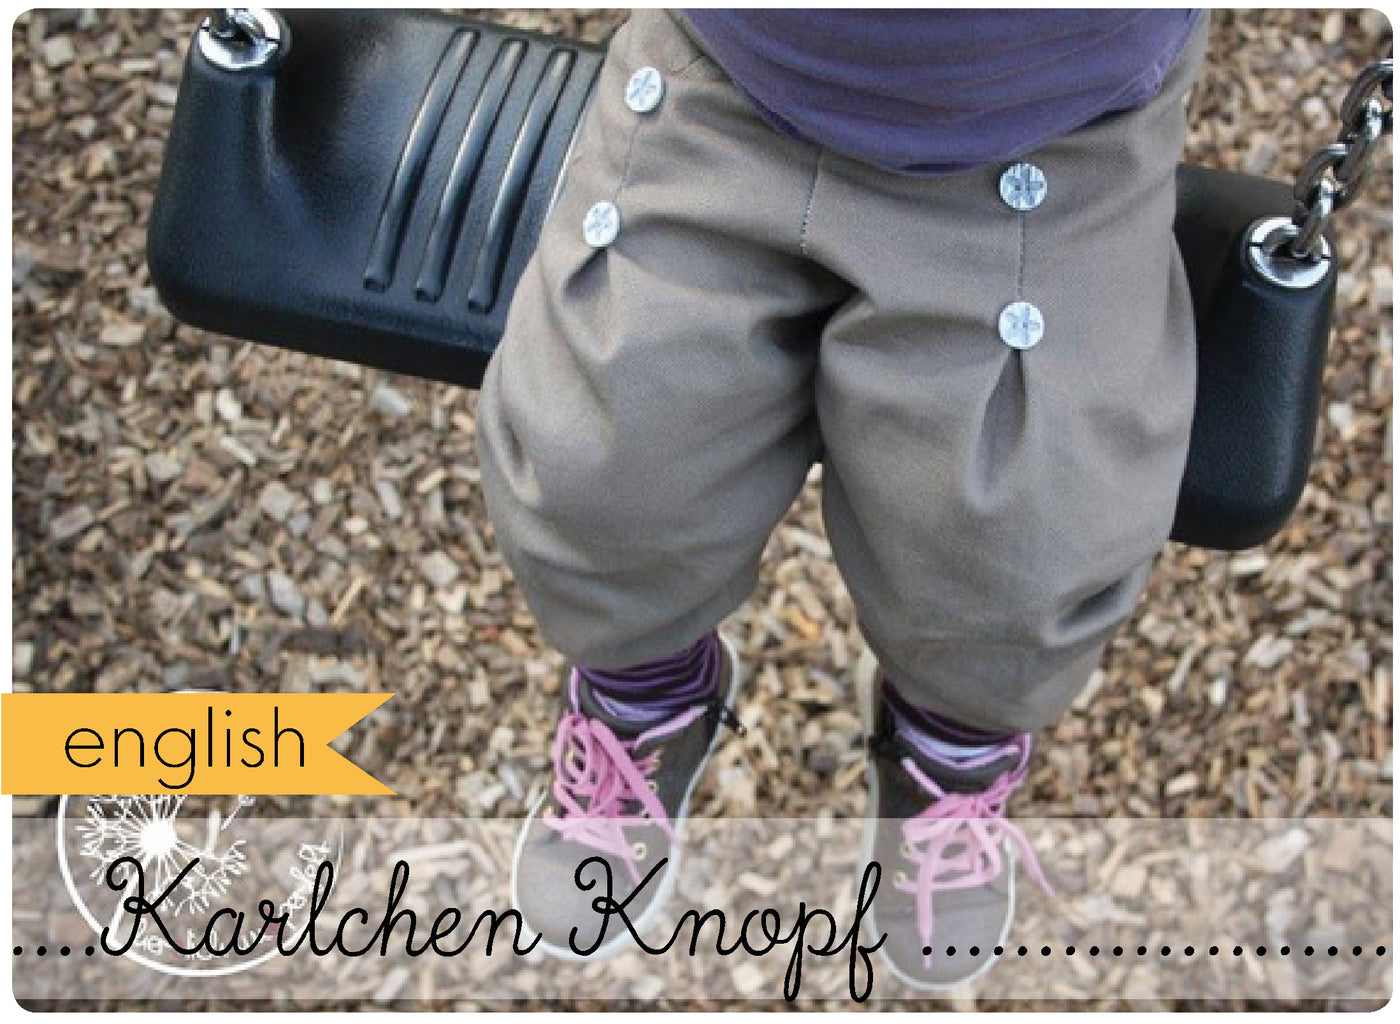 Karlchen Knopf baggy trousers (english)